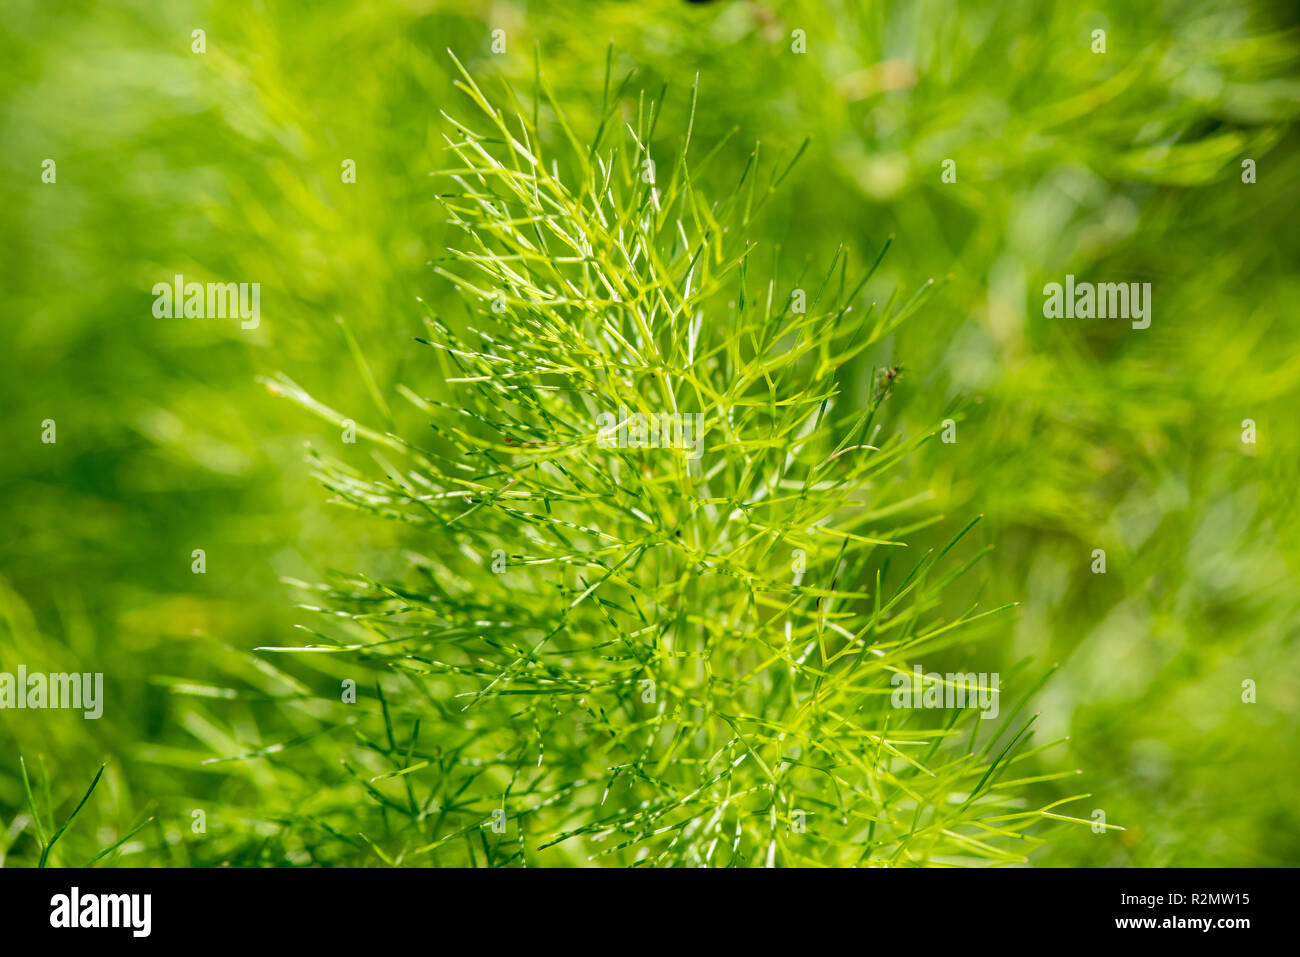 Fennel as a medicinal plant for natural medicine and herbal medicine Stock Photo